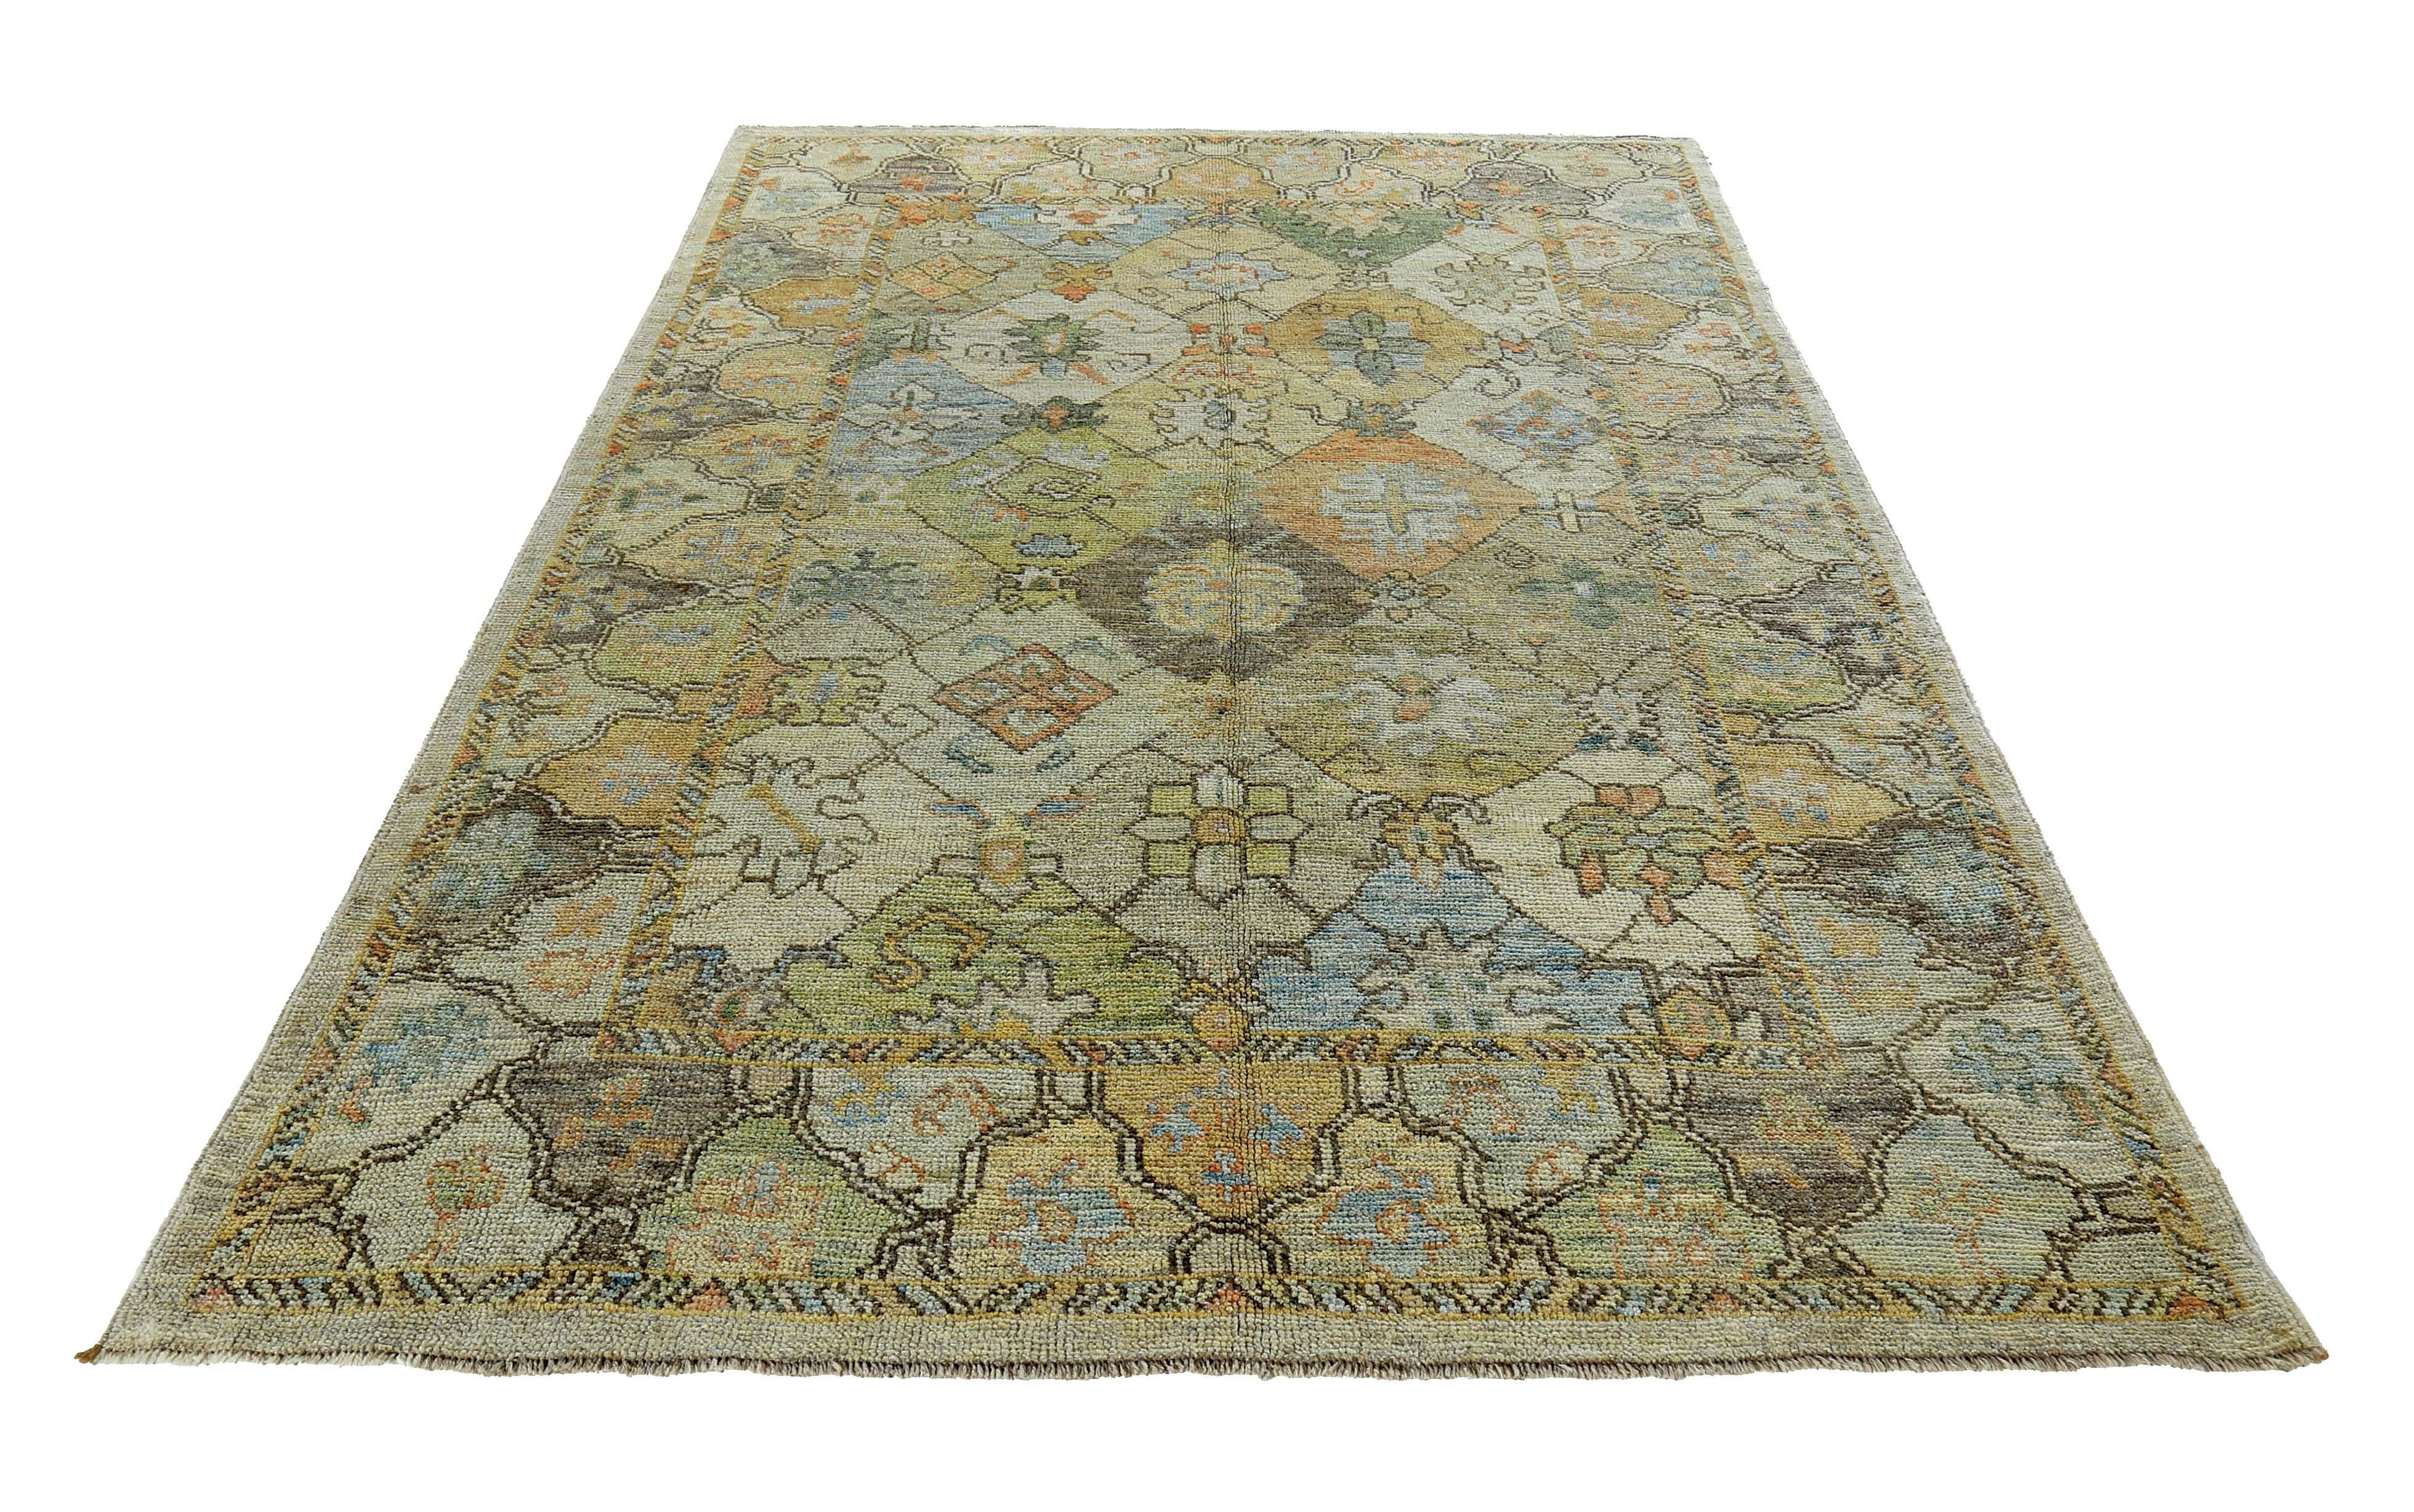 Turkish rug made of handwoven sheep’s wool of the finest quality. It’s colored with organic vegetable dyes that are certified safe for humans and pets alike. It features blue and green floral patterns on a beautiful ivory field. Flower patterns are